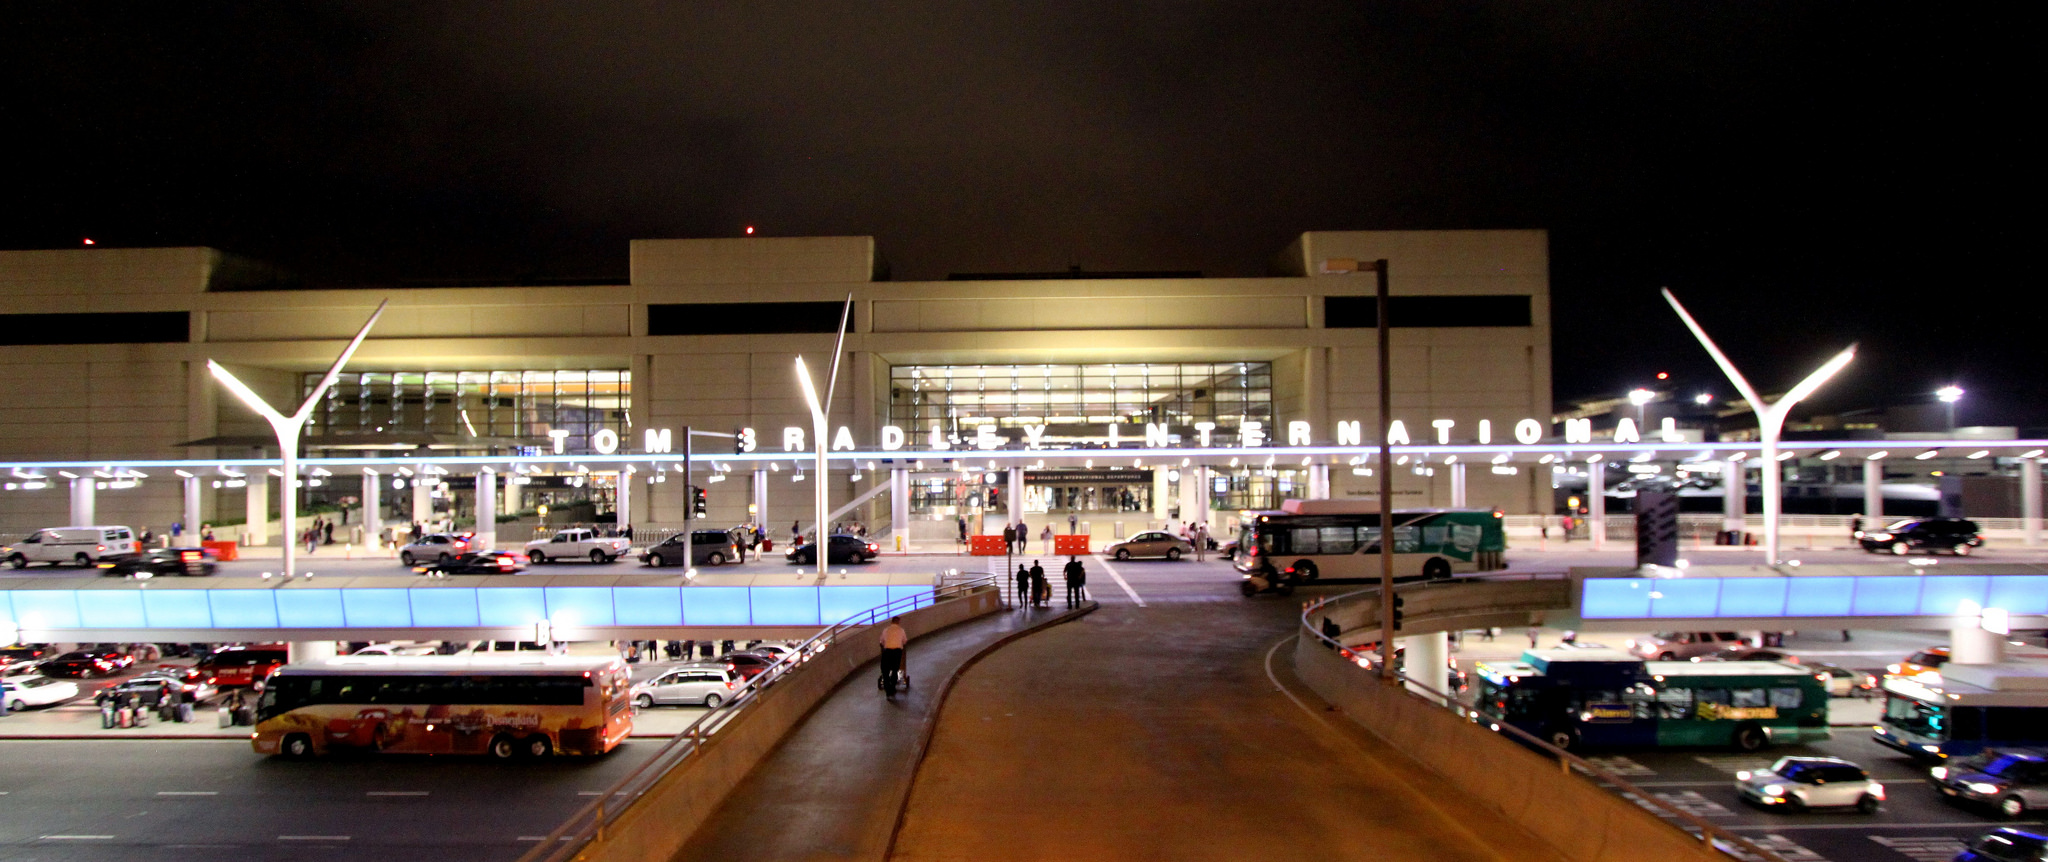 Tom Bradley Terminal, by Prayitno on Flickr - https://creativecommons.org/licenses/by/2.0/